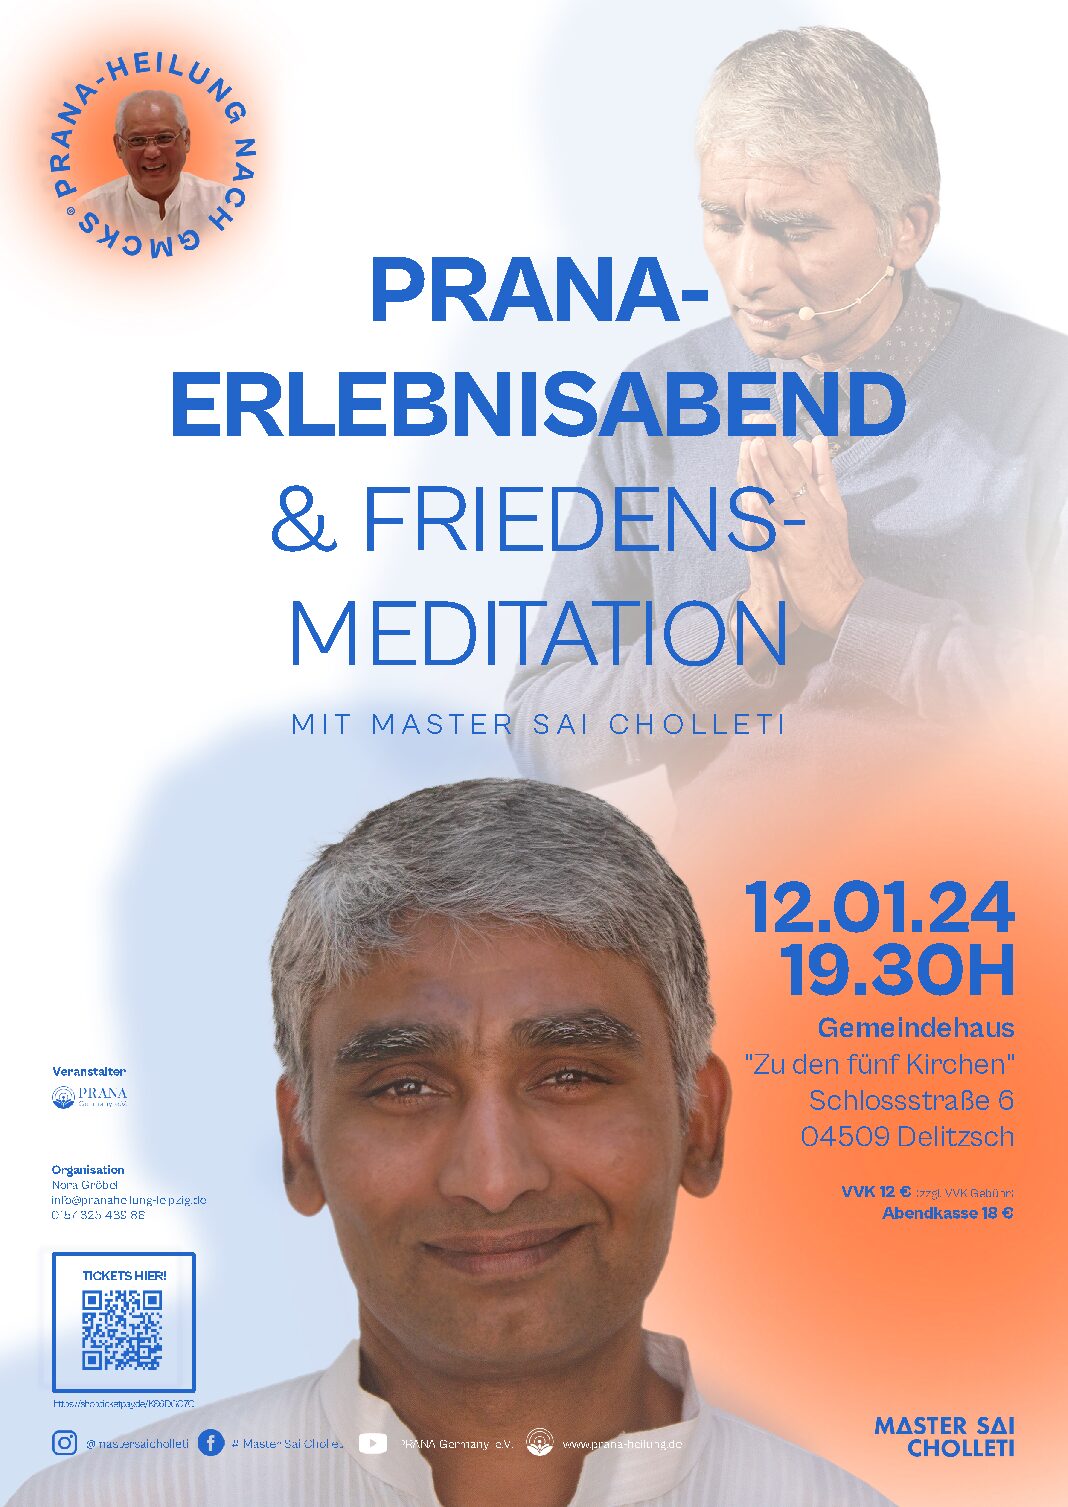 You are currently viewing Pranaerlebnisabend & Friedensmeditation mit Master Sai Choletti